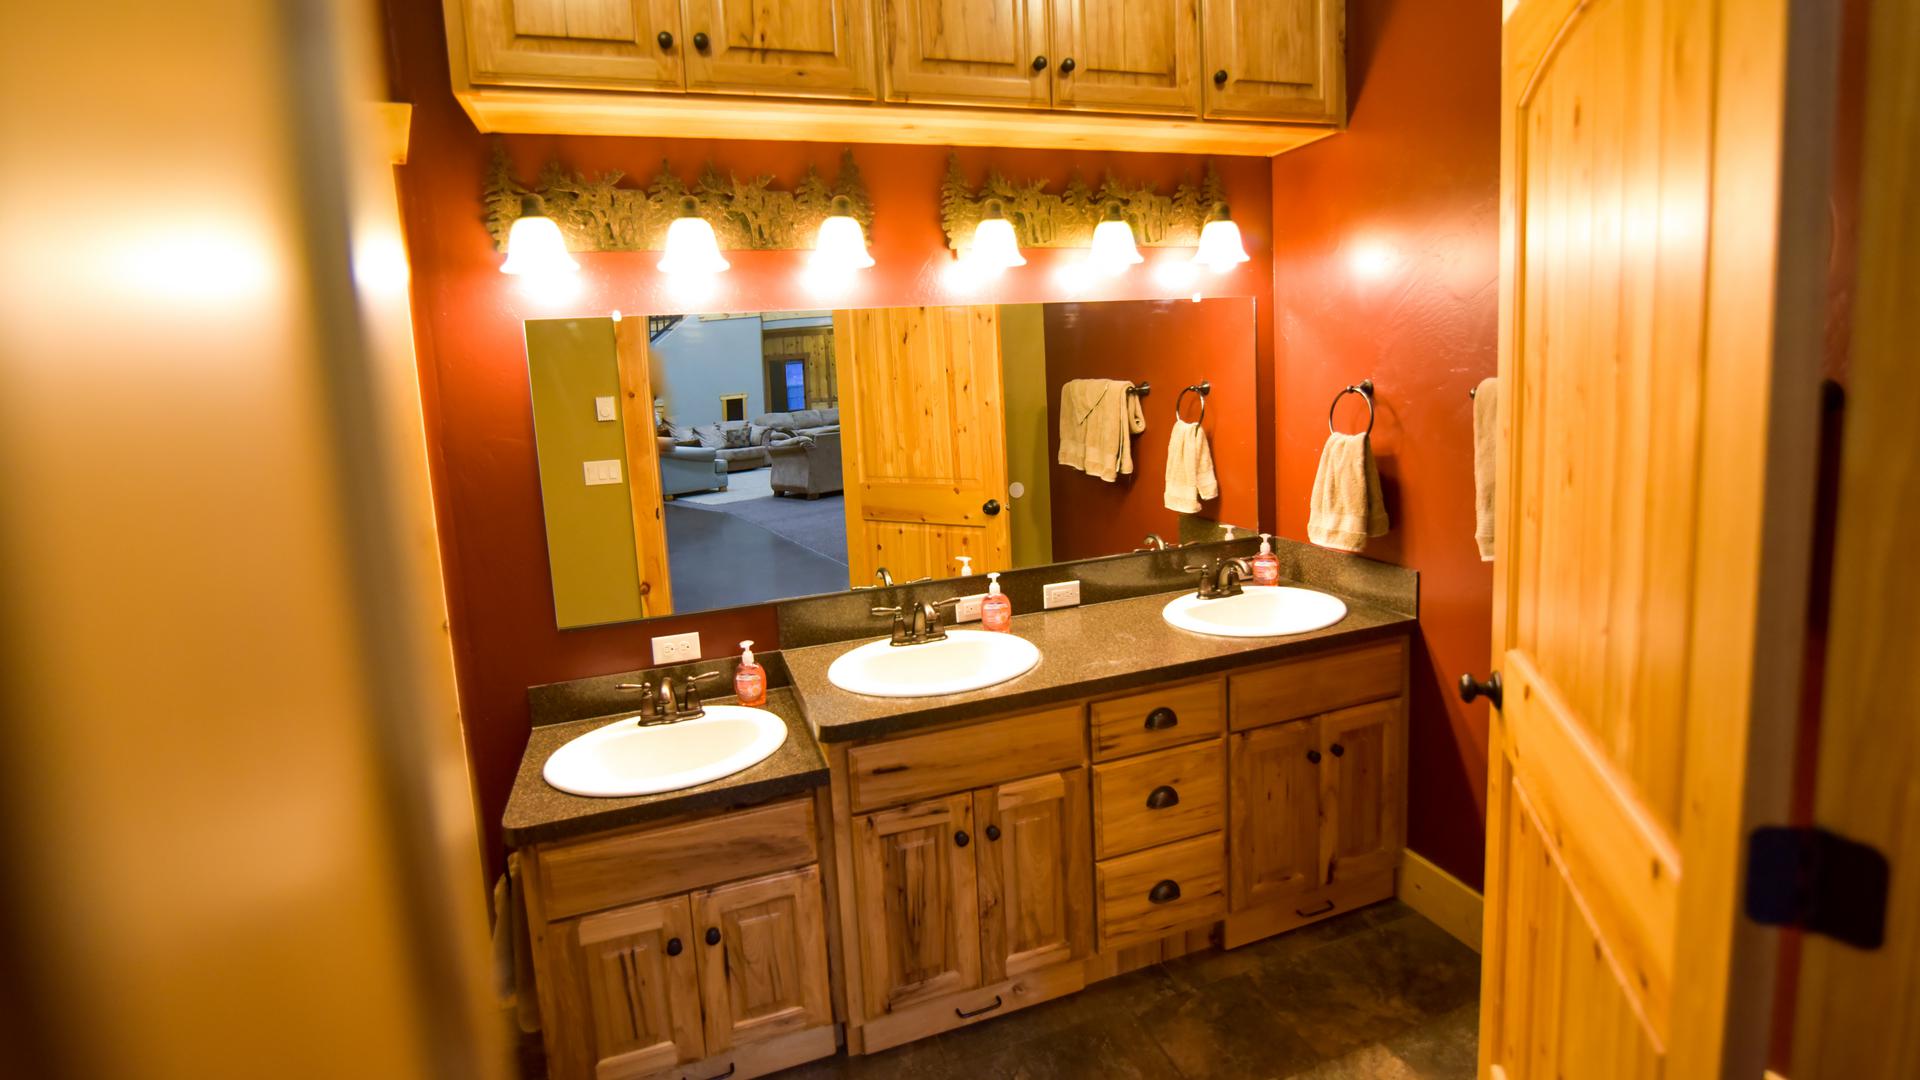 One of two washrooms with adjoining bathrooms.